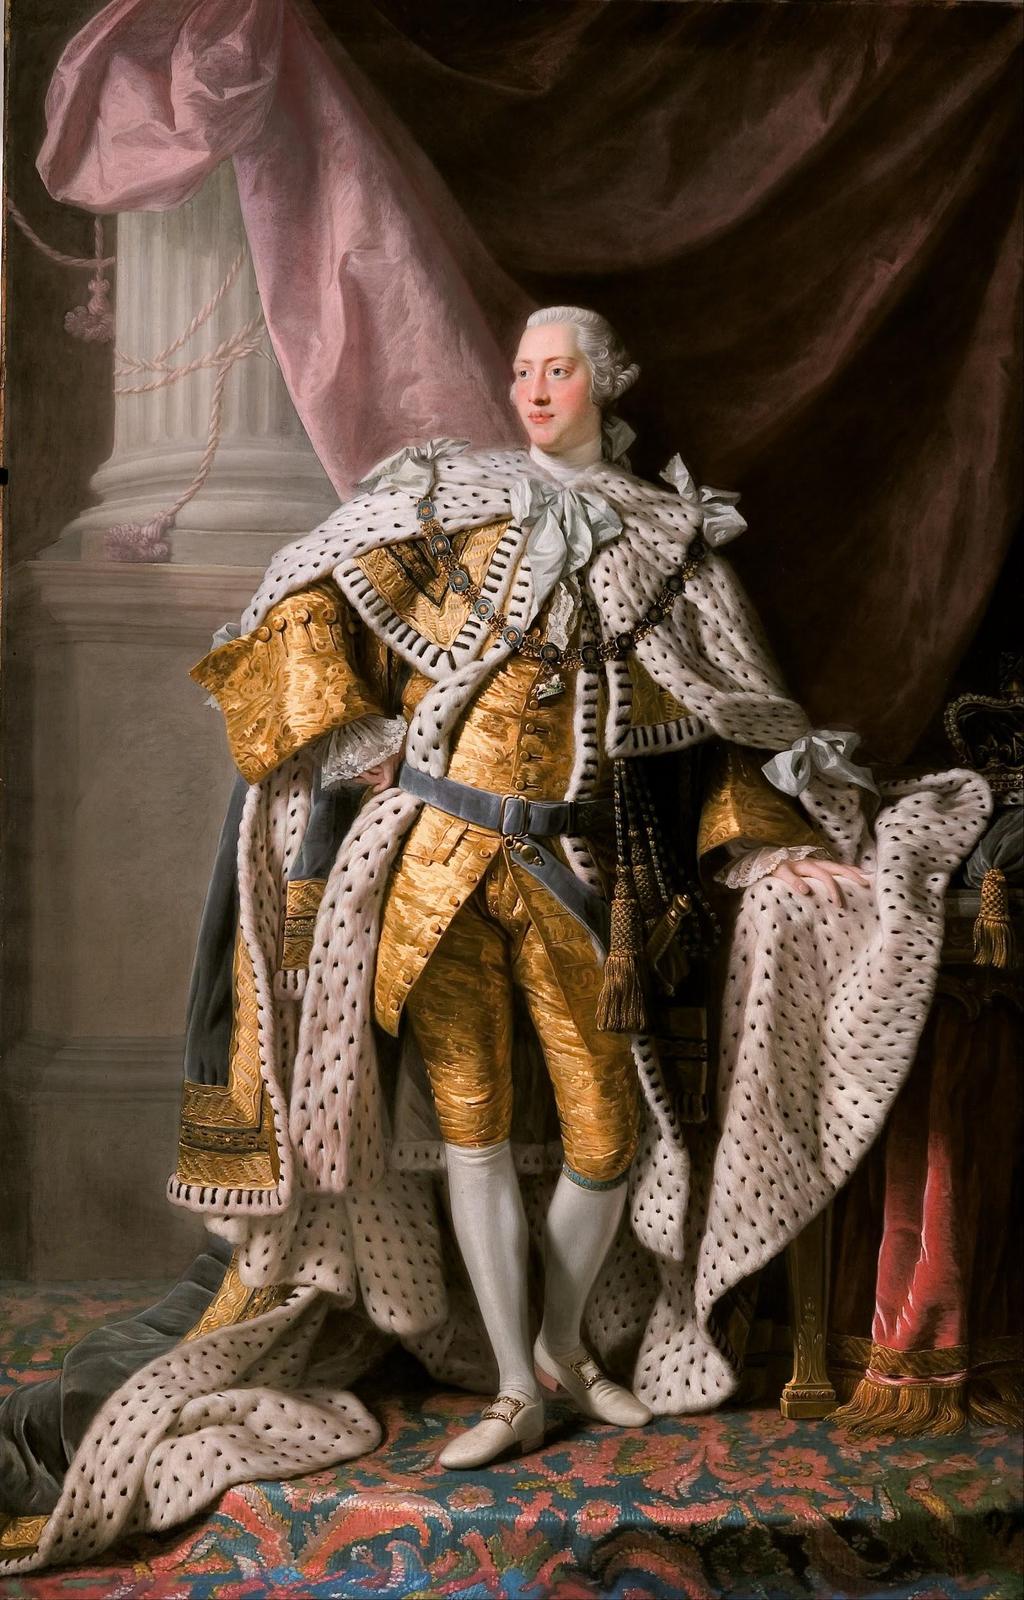 1760: King George III takes crown -Represented an authoritarian vision of empire where colonies